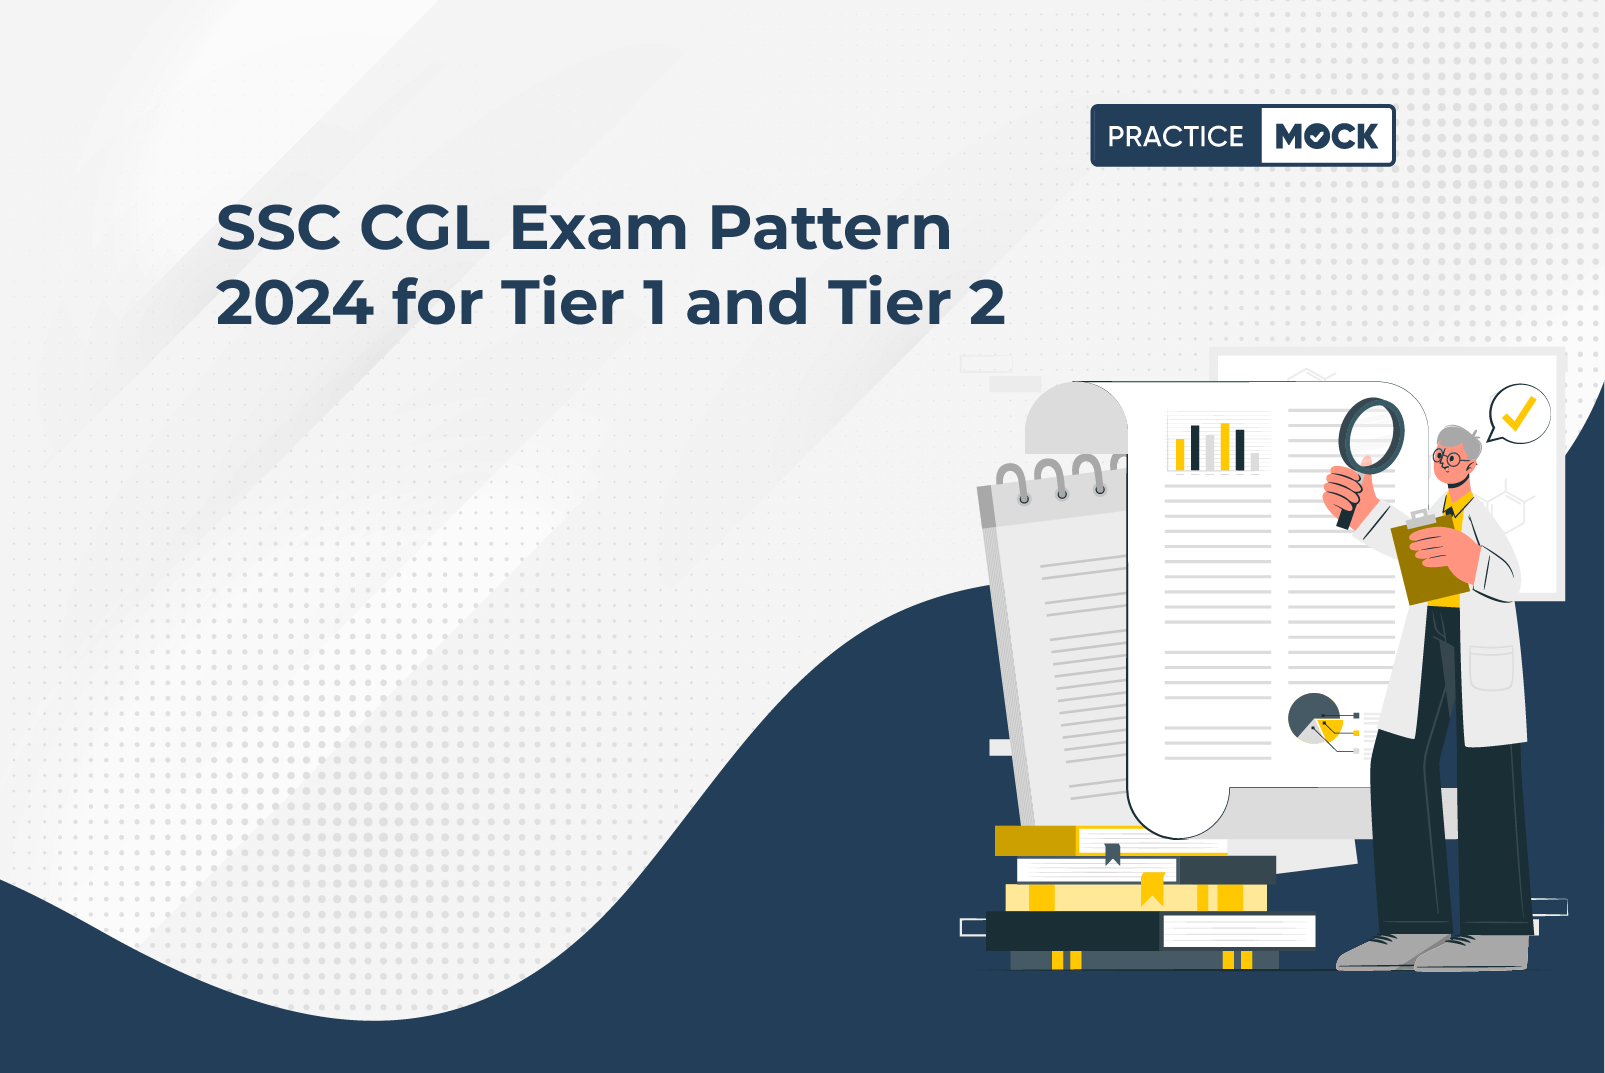 SSC CGL Exam Pattern 2024 for Tier 1 and Tier 2